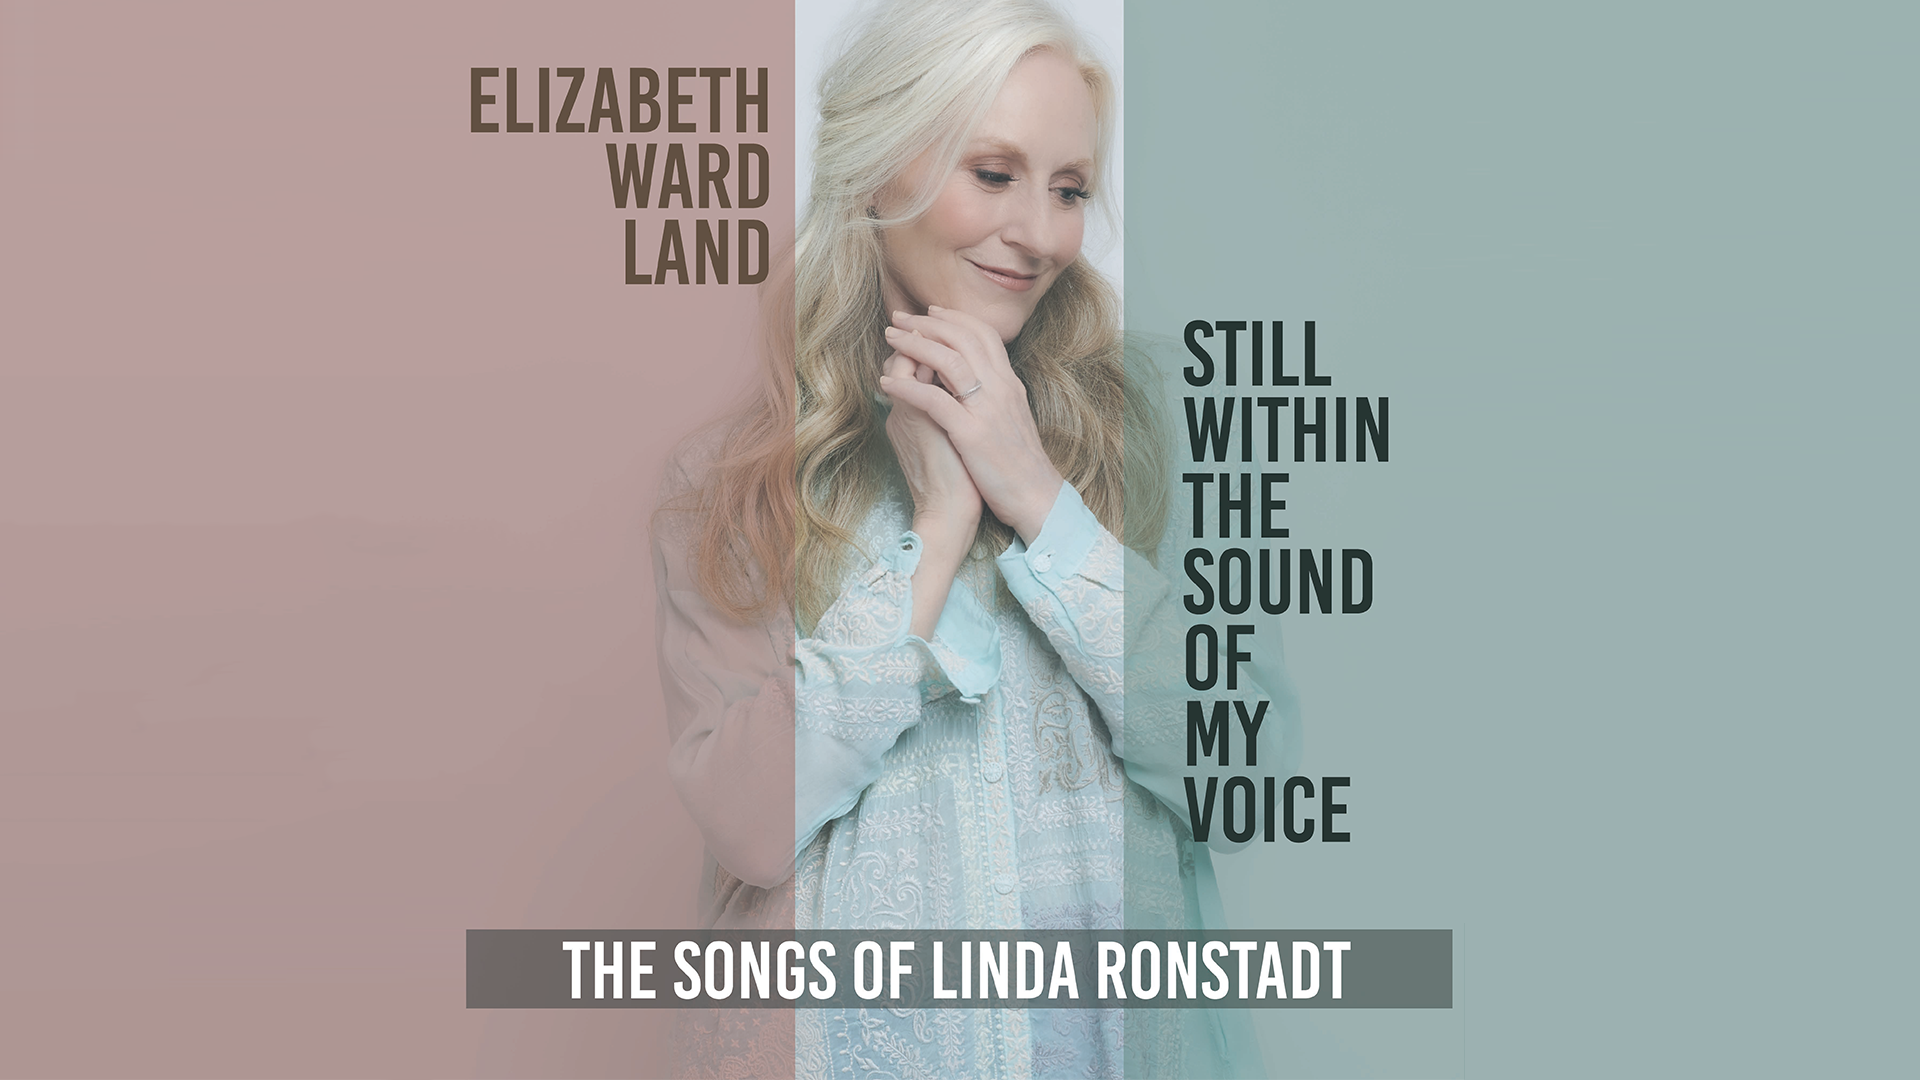 LML MUSIC PRESENTS: “STILL WITHIN THE SOUND OF MY VOICE: THE SONGS OF LINDA RONSTADT”